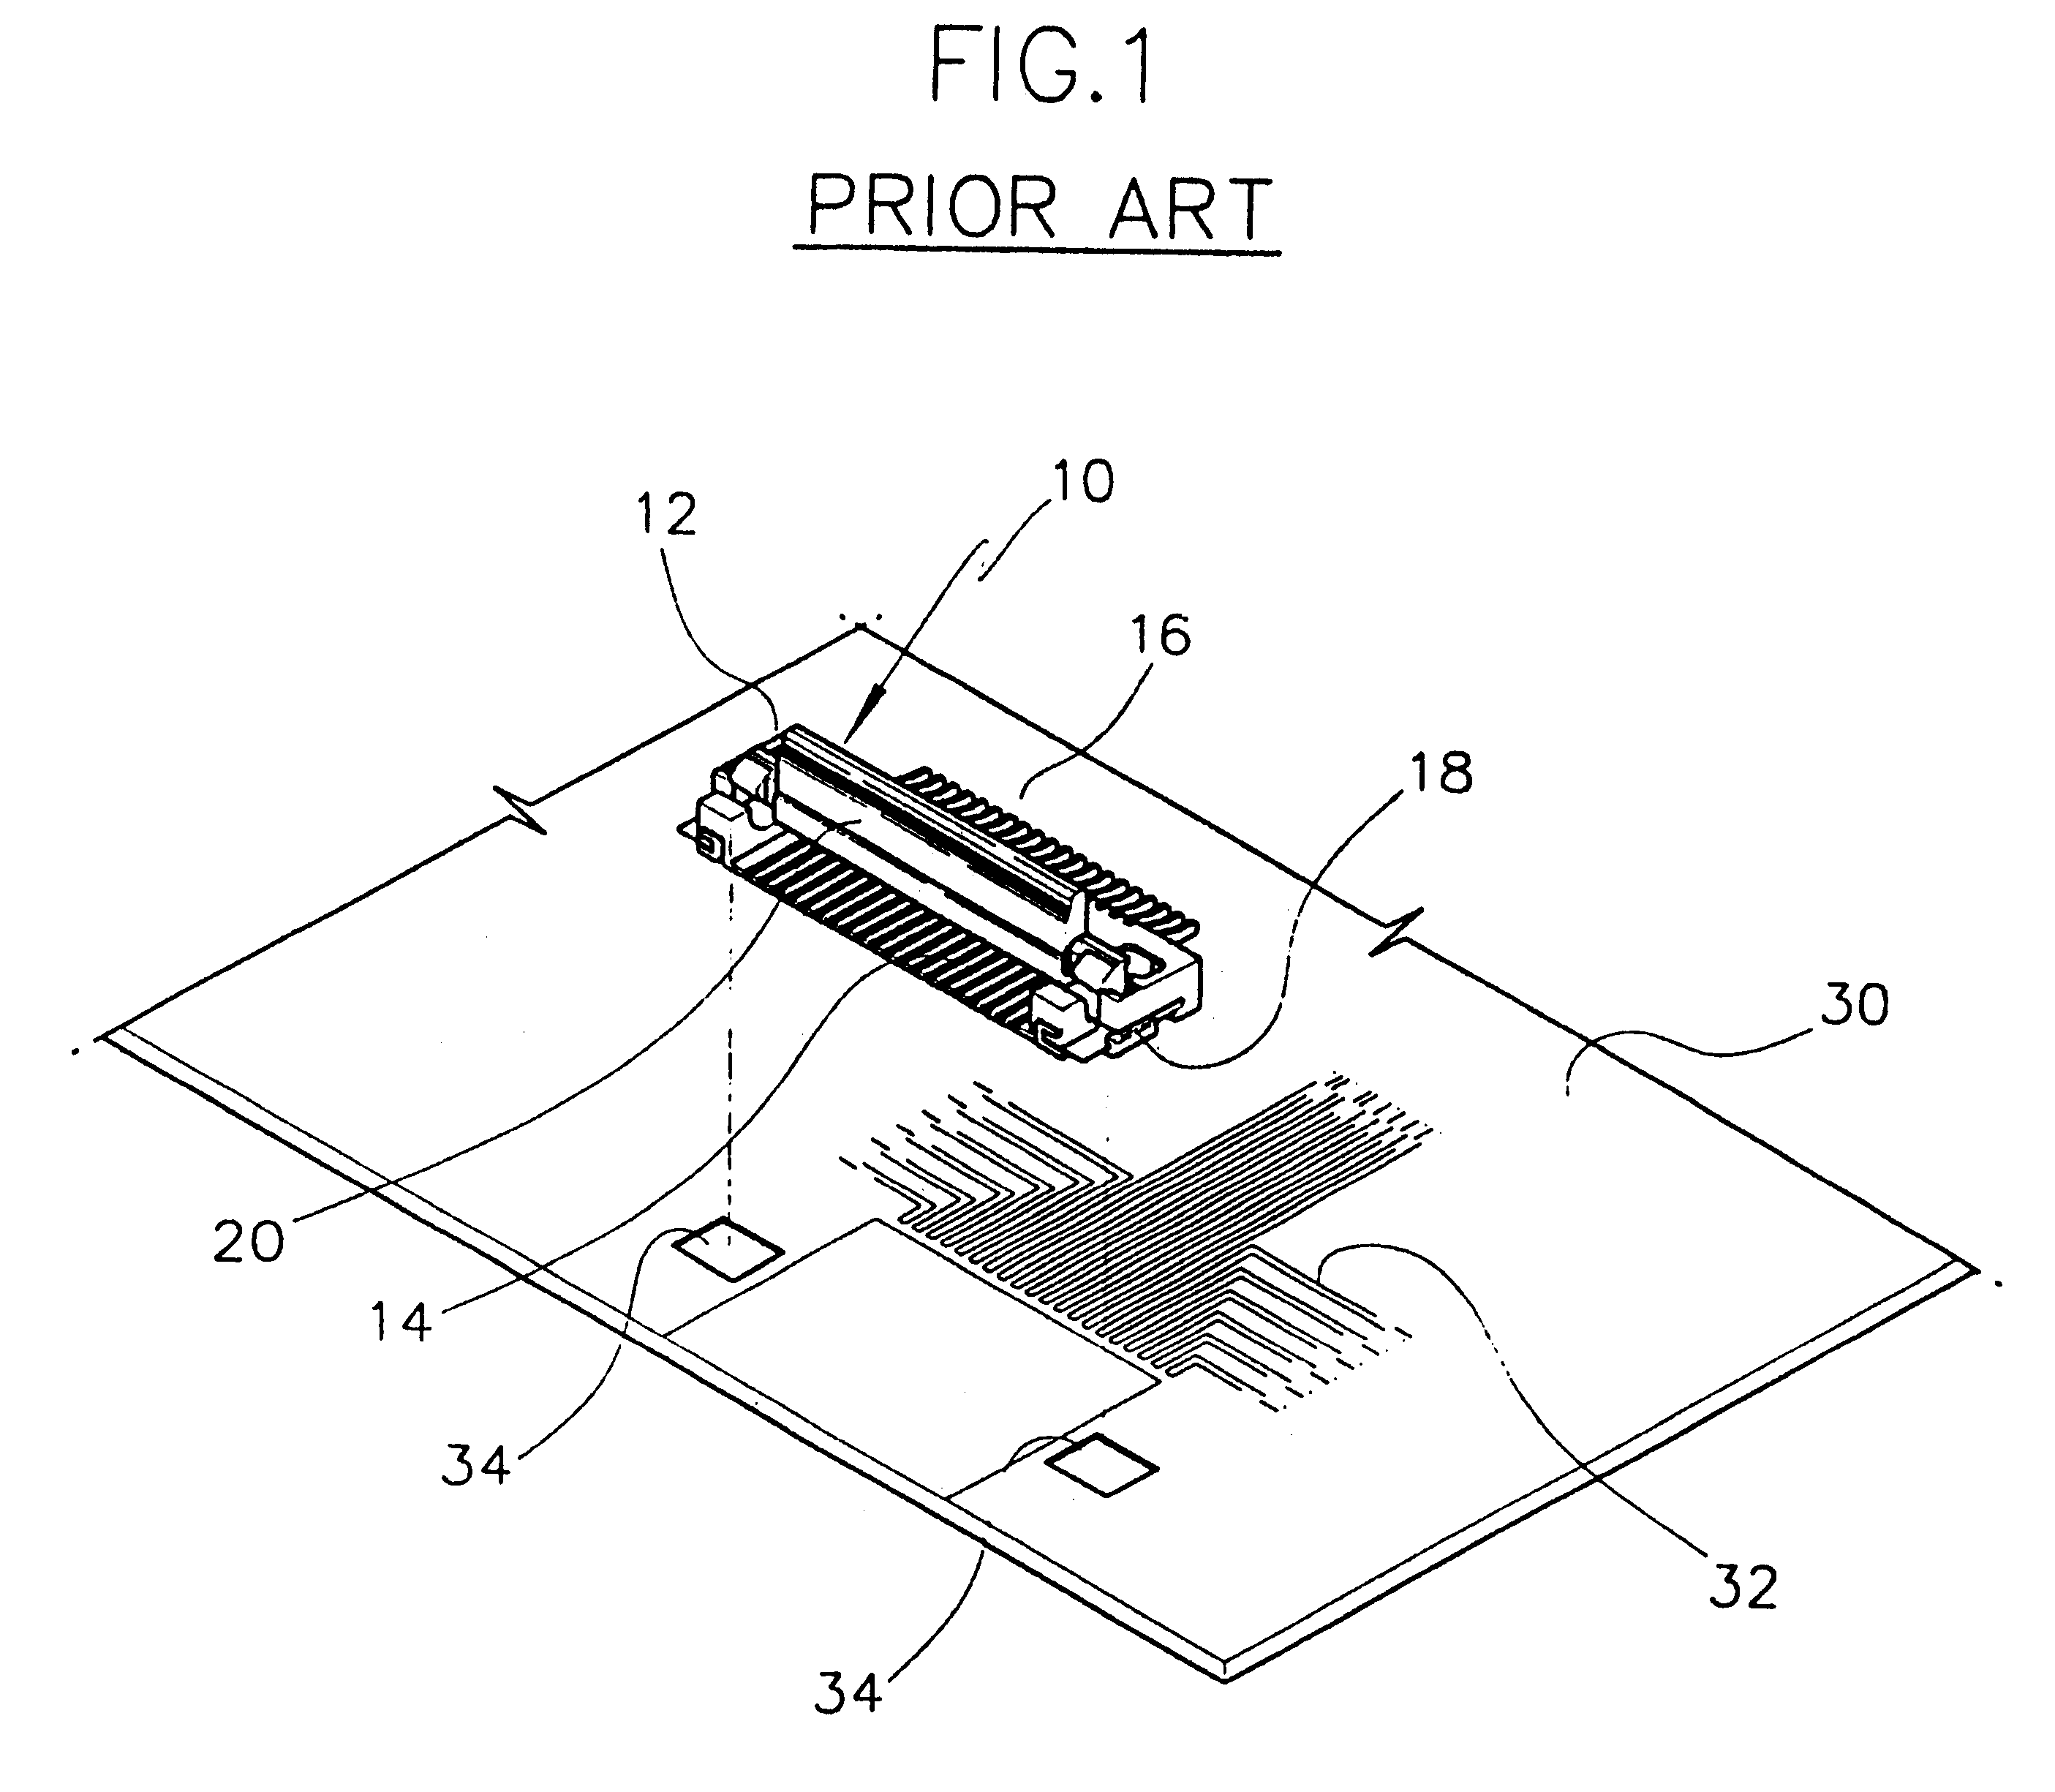 Electrical connector for connecting a flexible printed circuit to a rigid printed circuit board